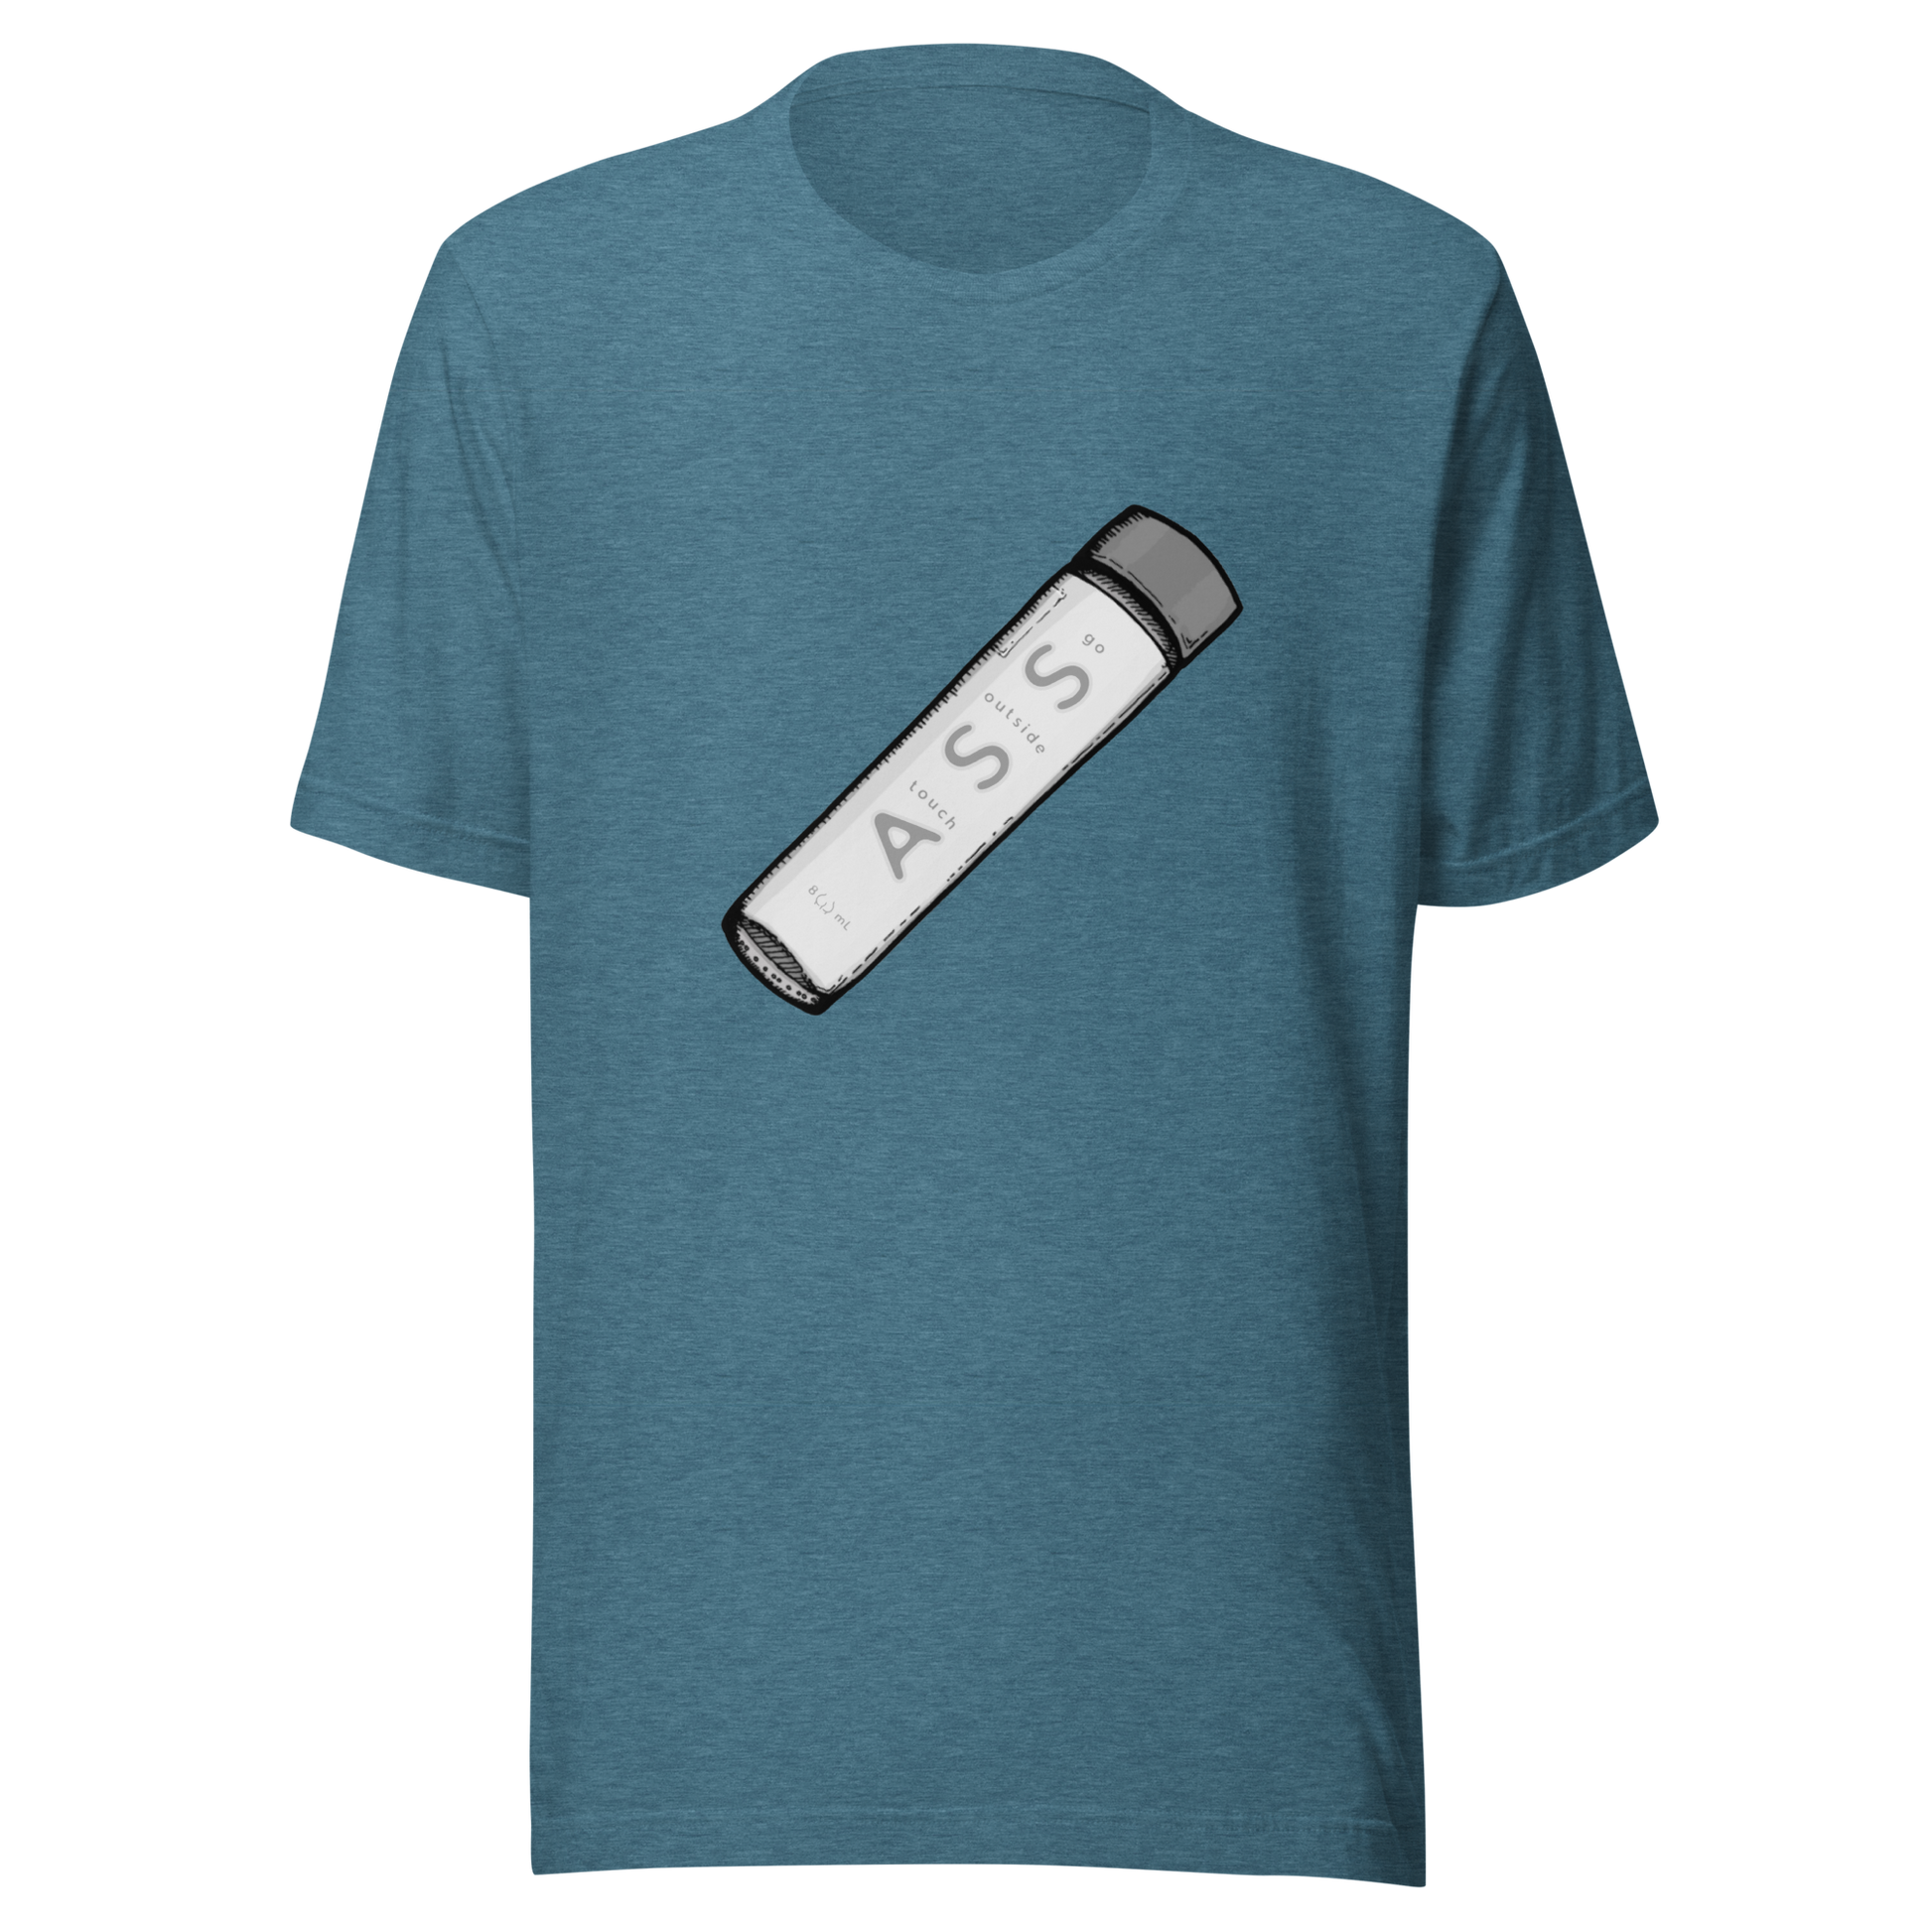 go outside touch ass t-shirt in teal - gaslit apparel